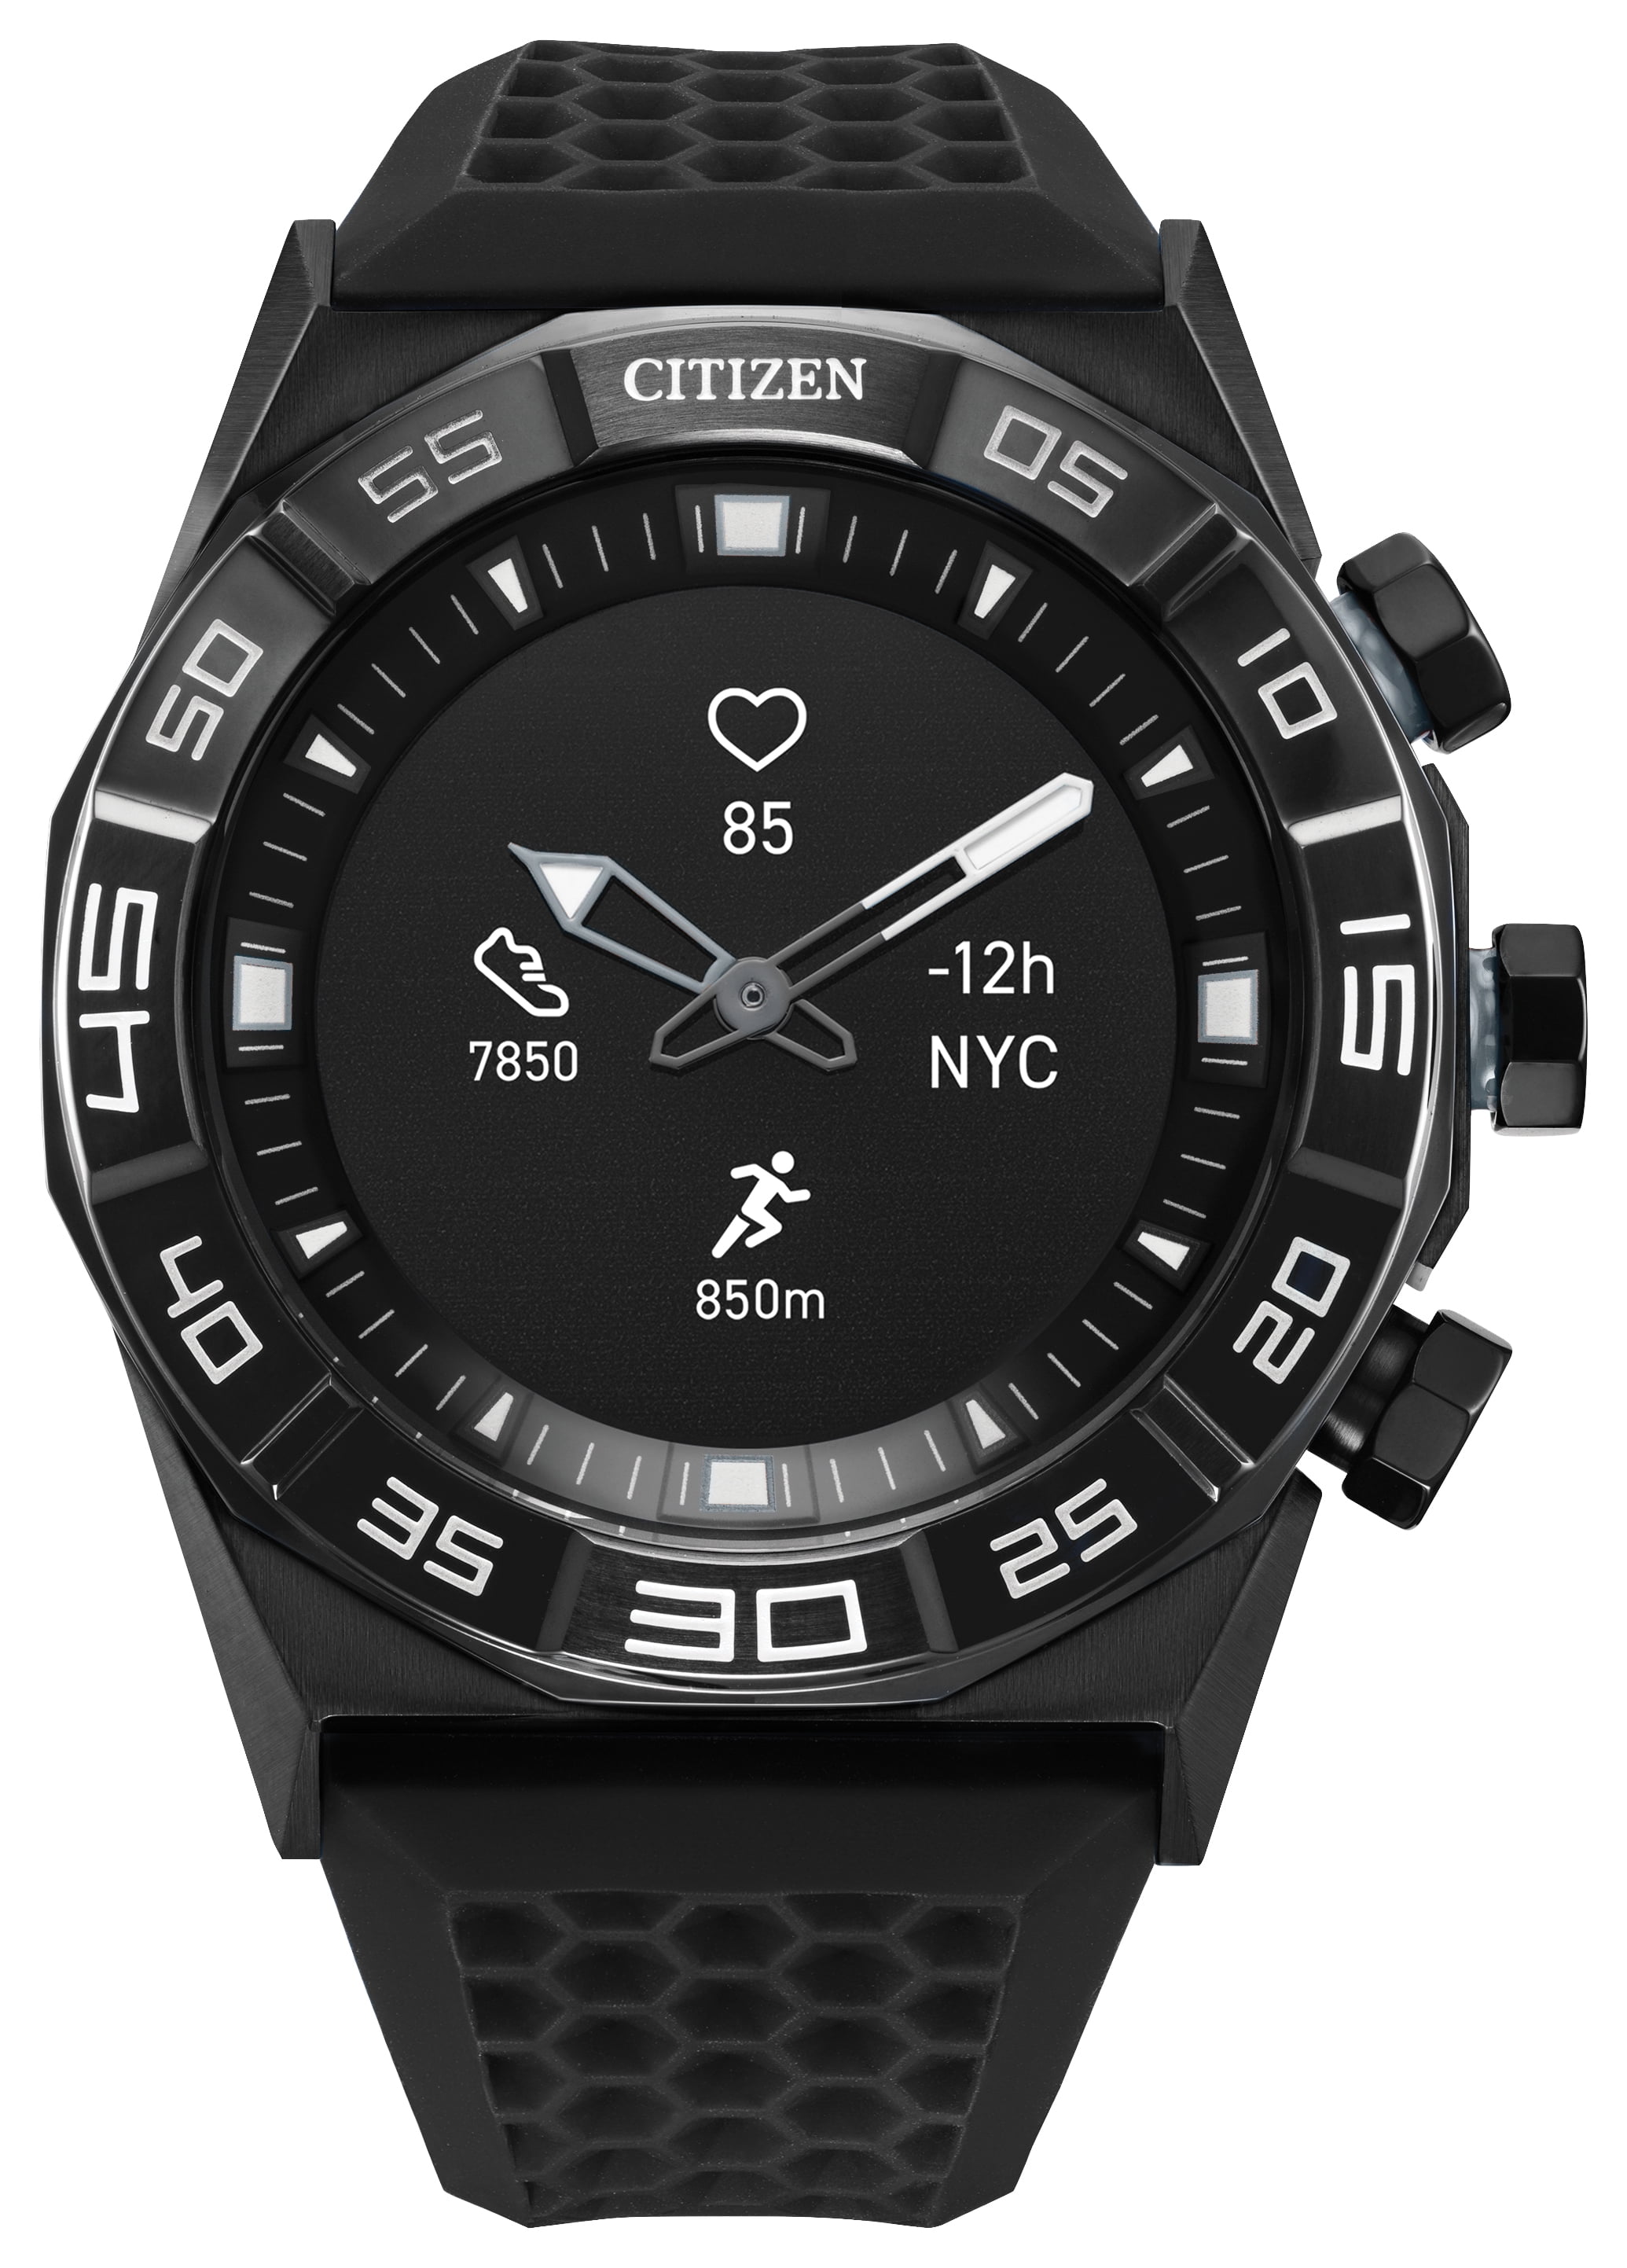 Citizen CZ Smart 44mm Black IP Stainless Steel Hybrid Heart Rate Smartwatch  with Black Silicone Strap - JX1007-04E